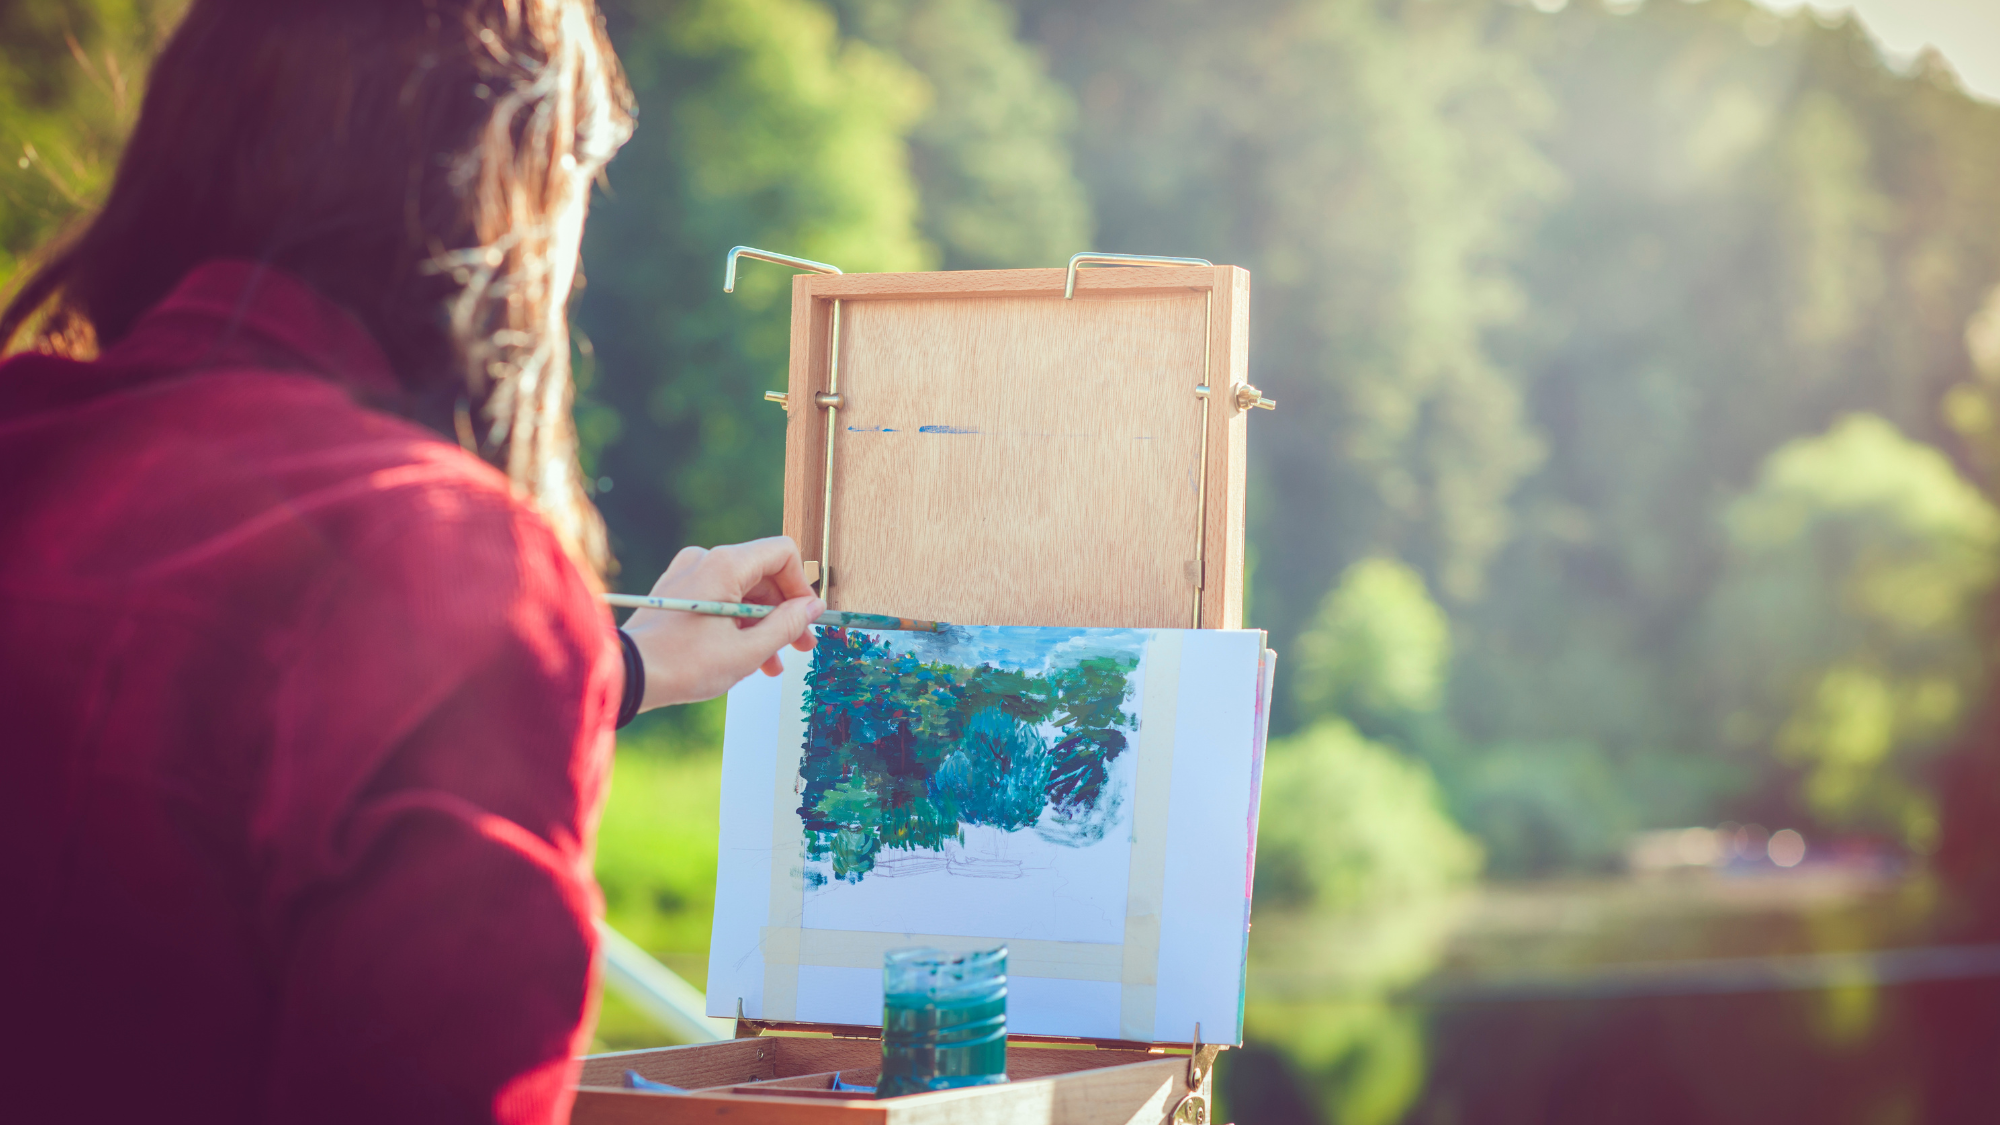 A woman is painting on an easel in front of a river.